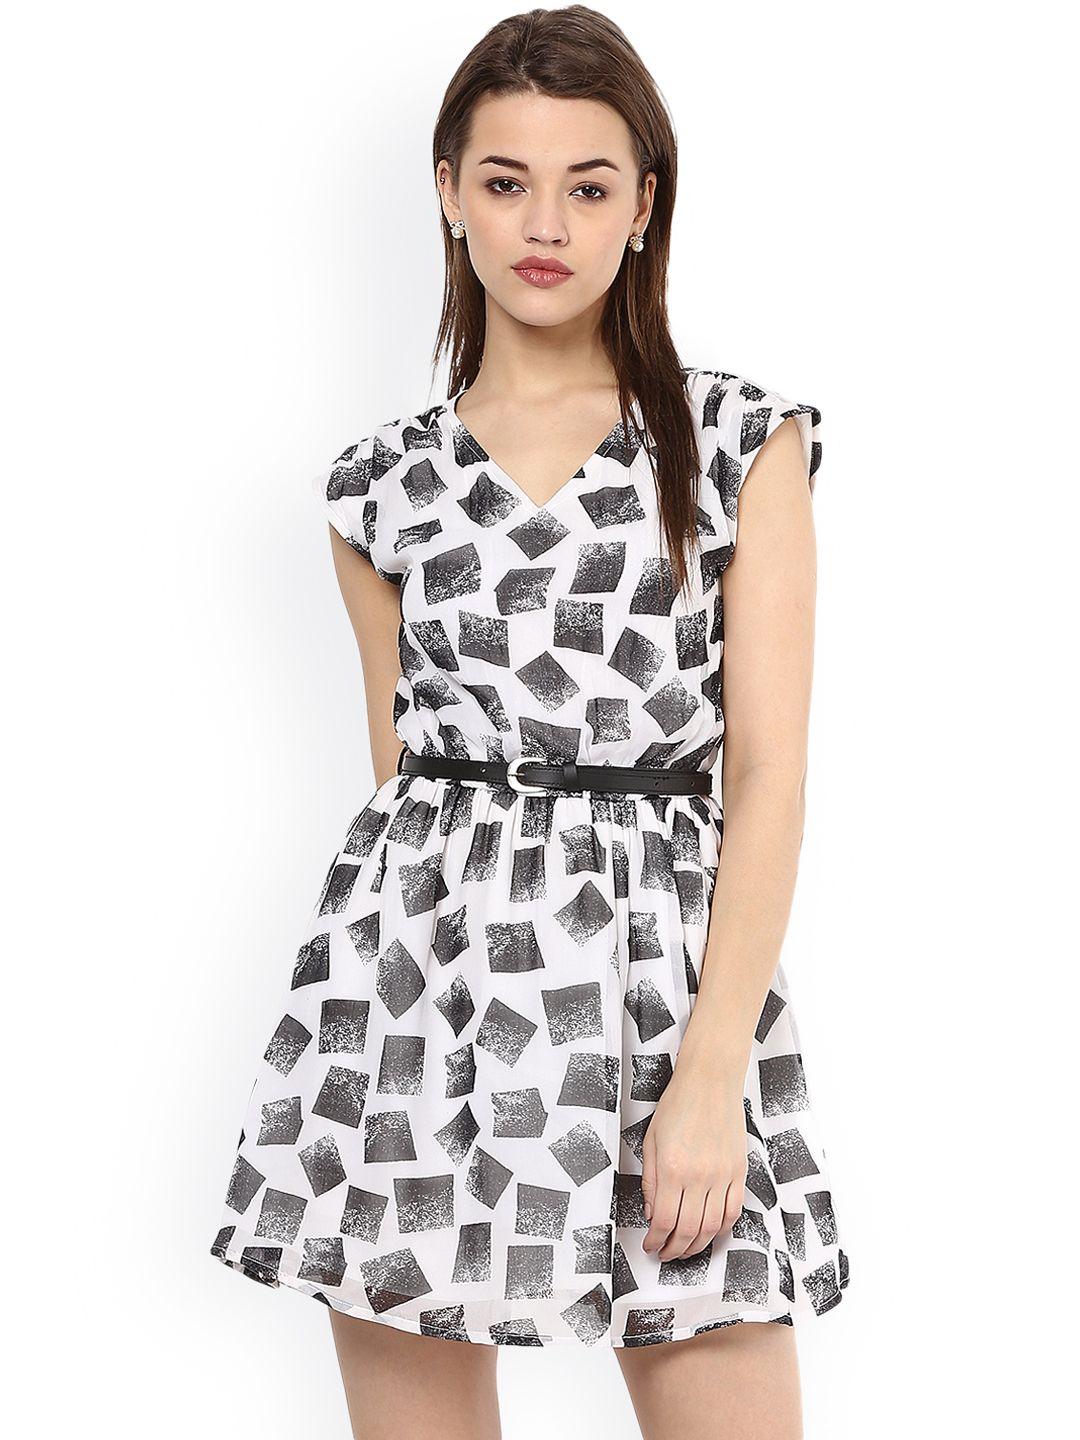 la-zoire-women-white-printed-fit-and-flare-dress